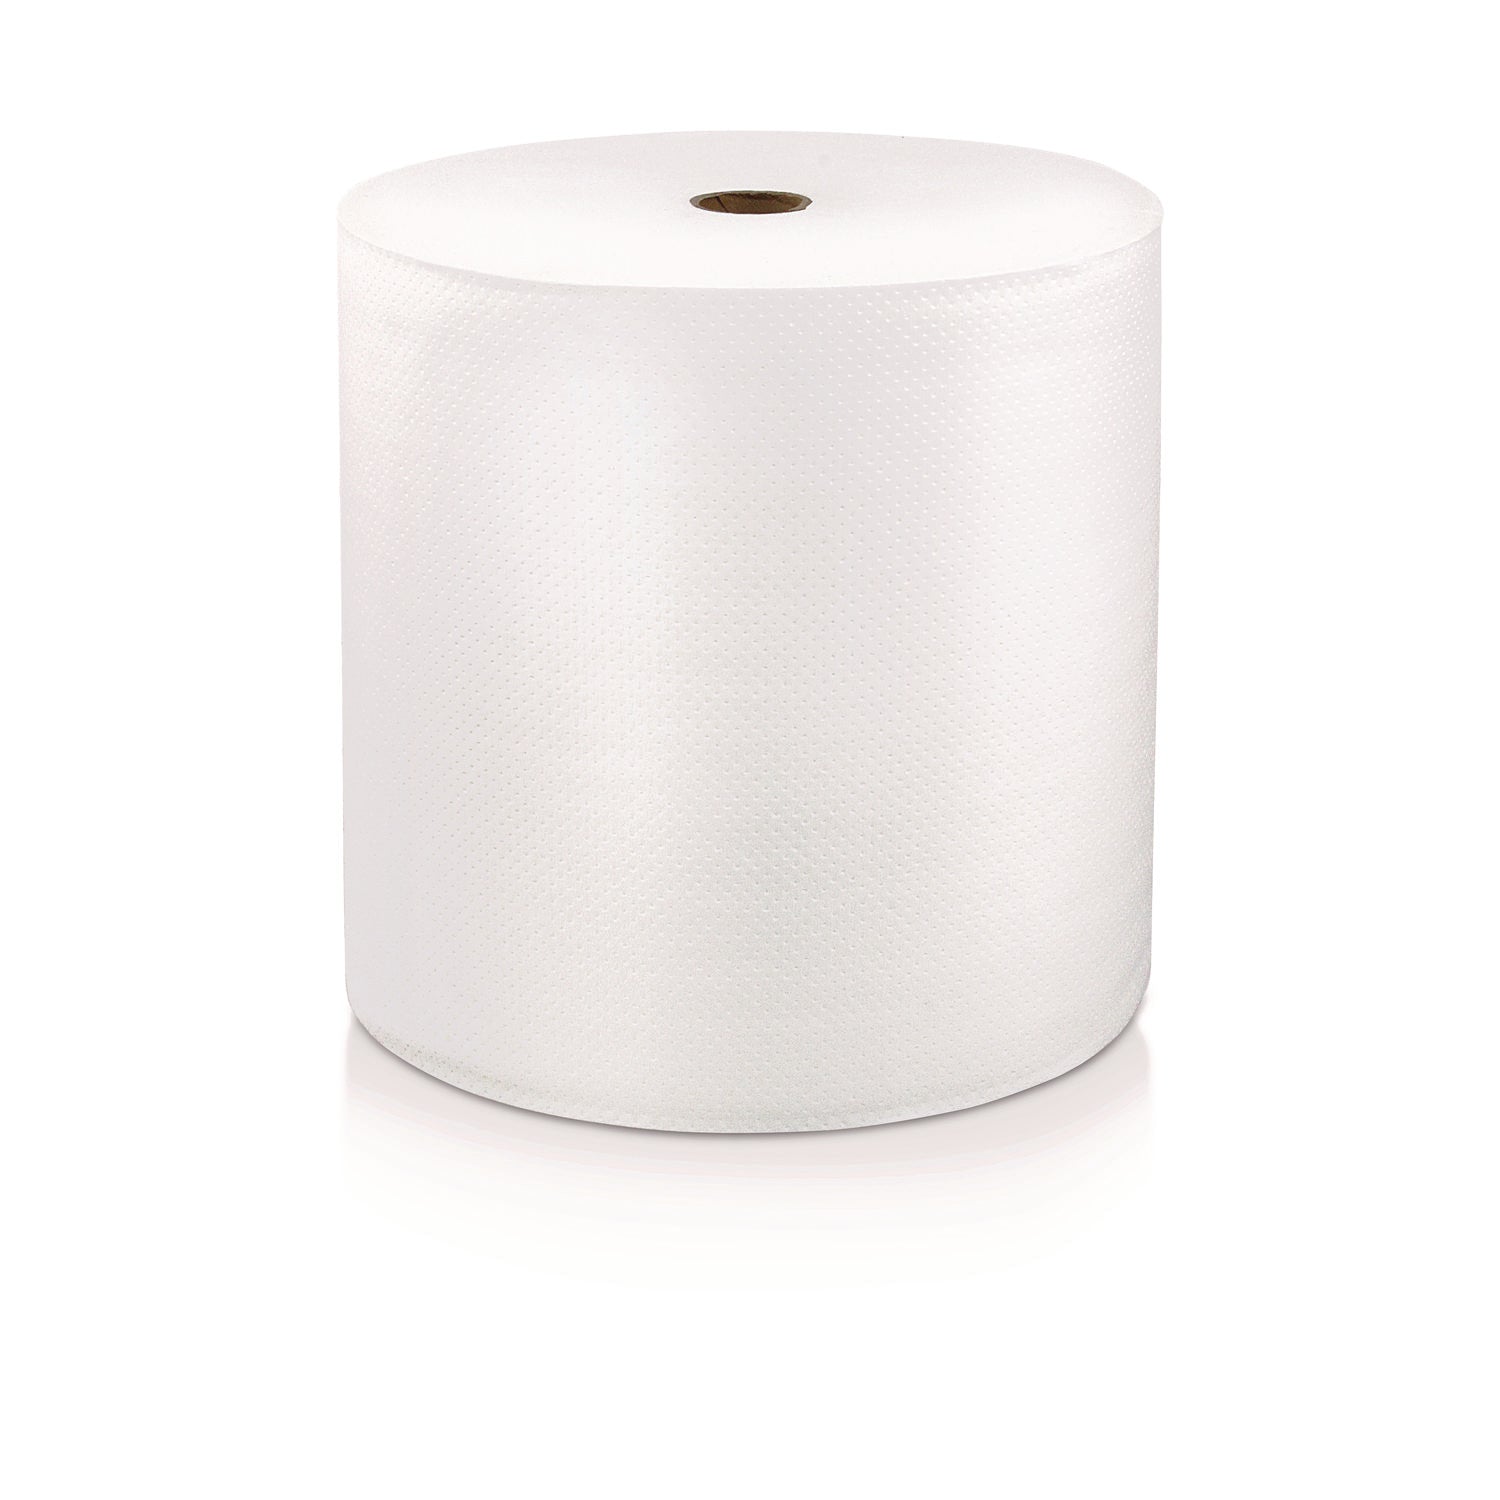 hard-wound-roll-towel-1-ply-7-x-1000-ft-white-6-rolls-carton_sol46902 - 1